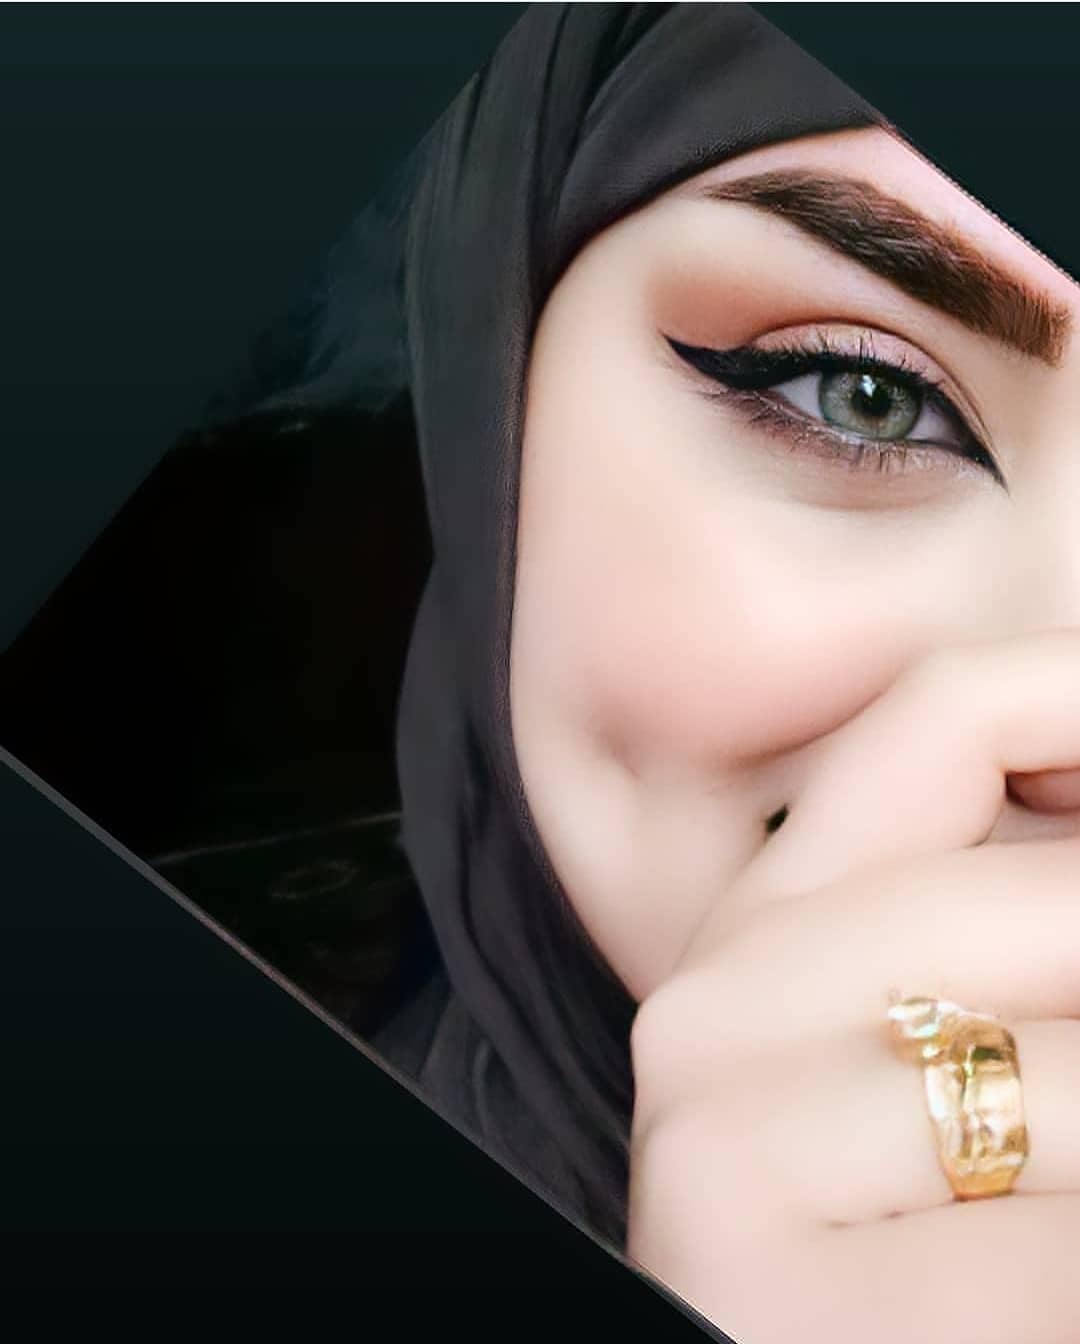 Girls Hijab Style DP for WhatsApp/Facebook/Instagram Profile | Facebook  Display Pictures